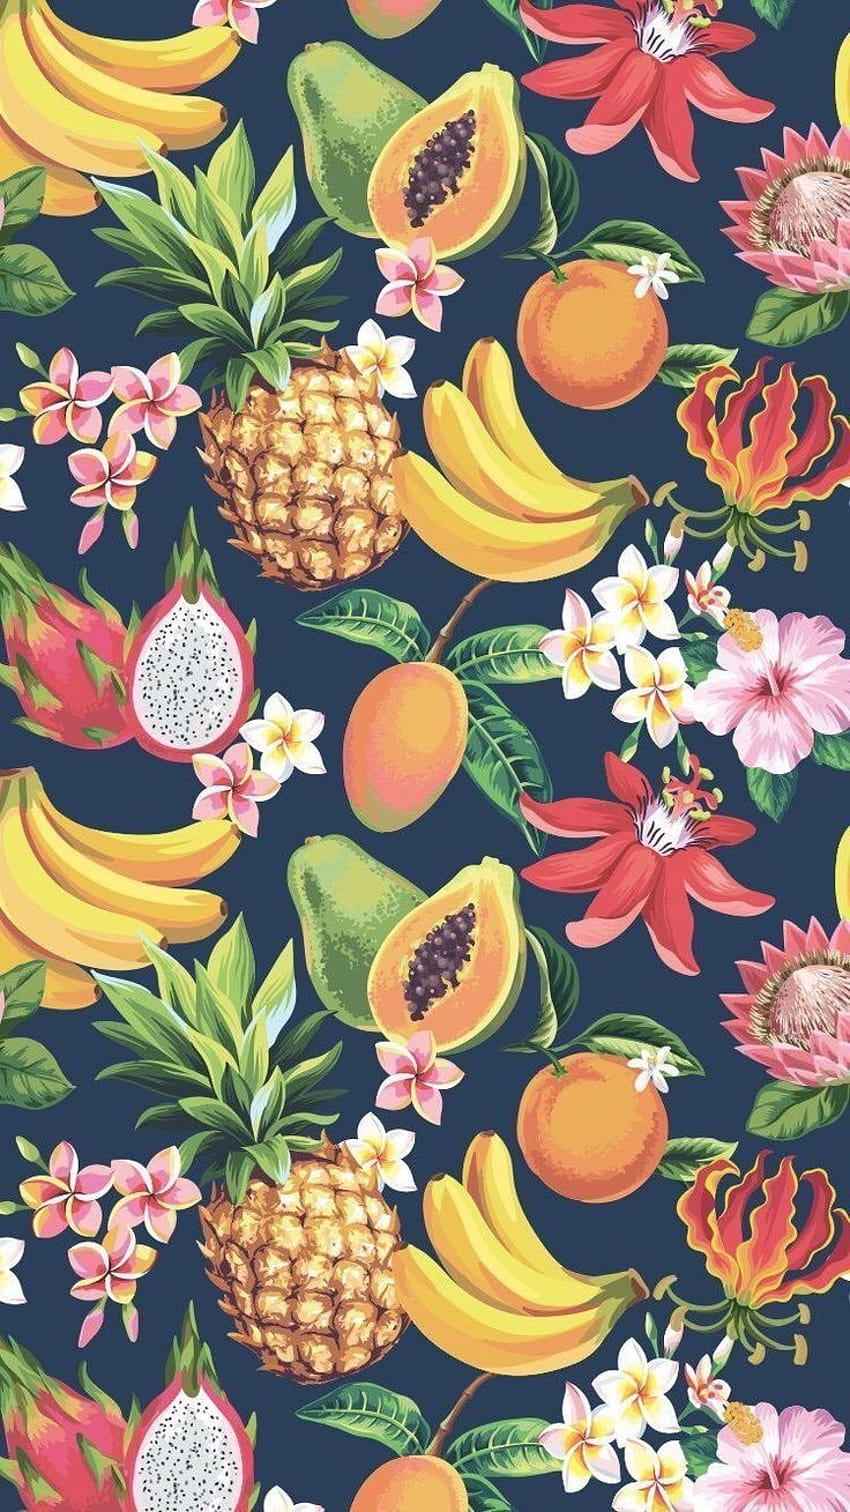 Summer is finally here, celebrate with this tropical for your smartphone, fruit summer HD phone wallpaper